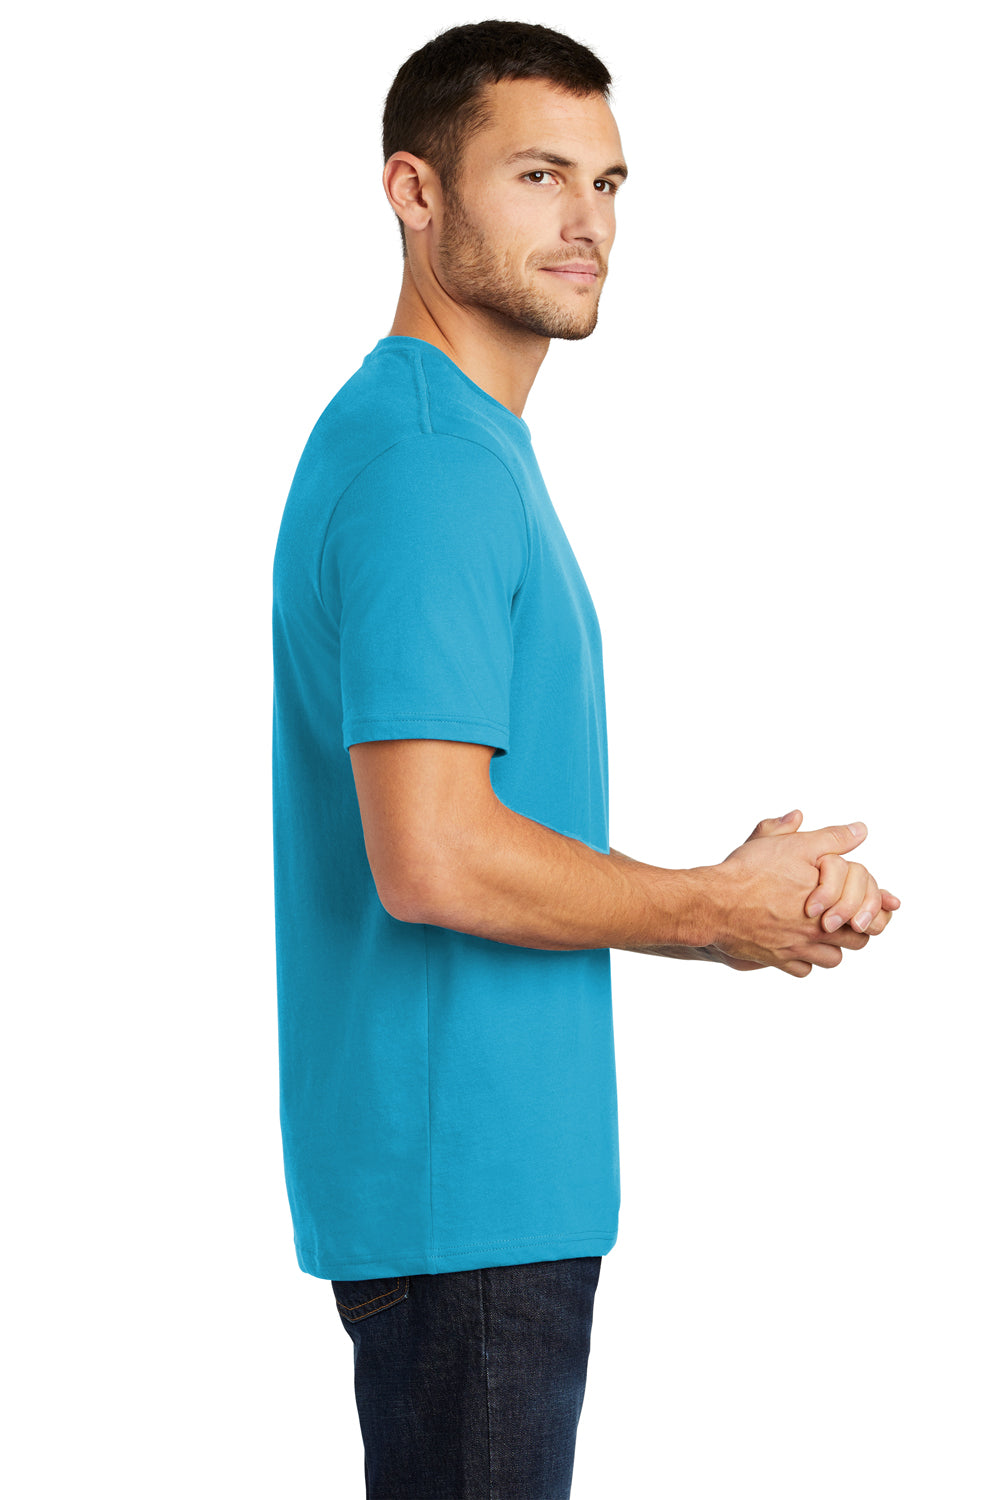 District DT104 Mens Perfect Weight Short Sleeve Crewneck T-Shirt Turquoise Blue Side